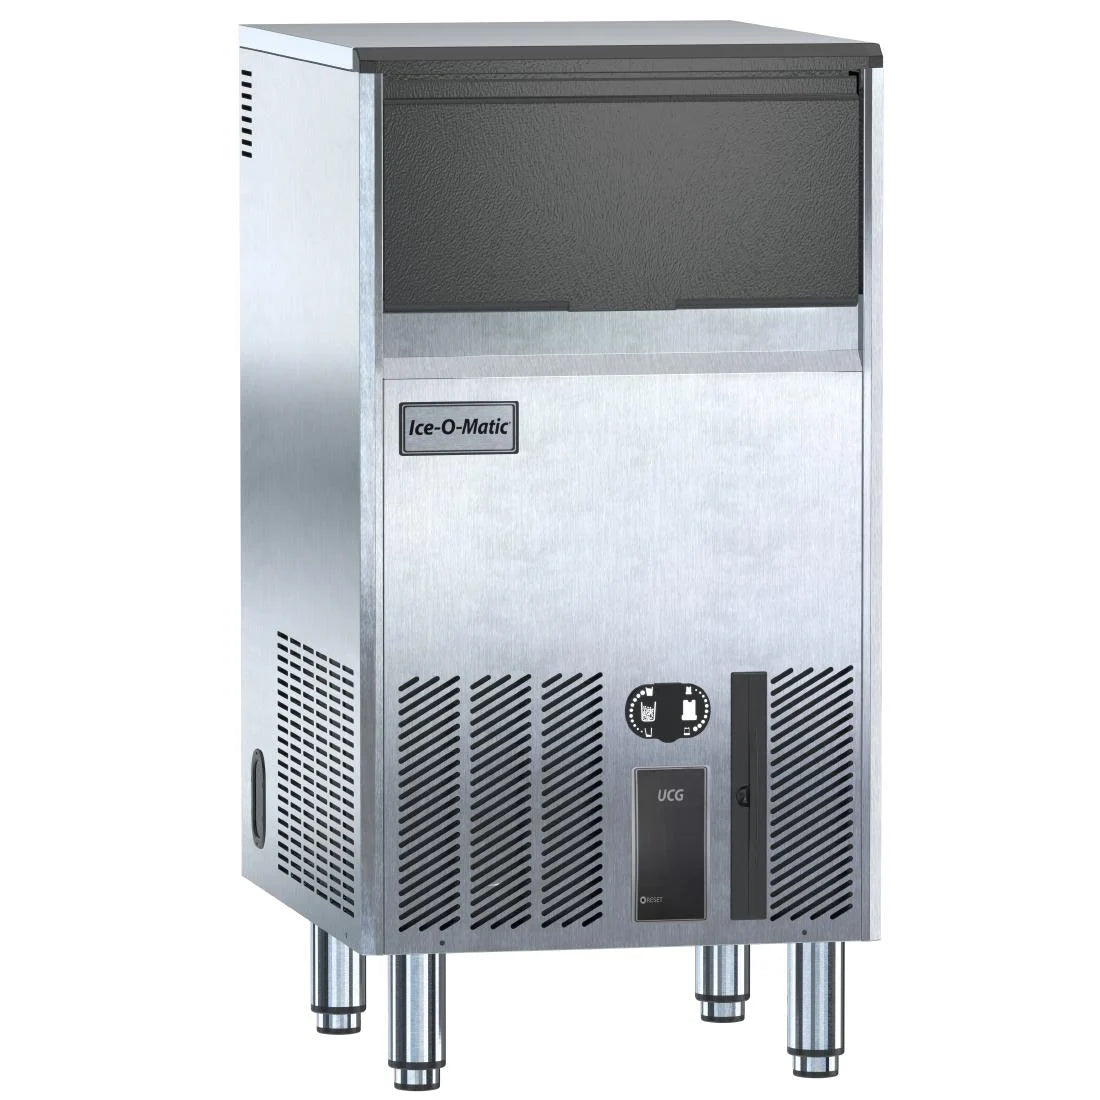 Ice-O-Matic Bistro Cube Ice Machine UCG105A.Product Ref:00548.MODEL:FT643.🚚 3-5 Days Delivery